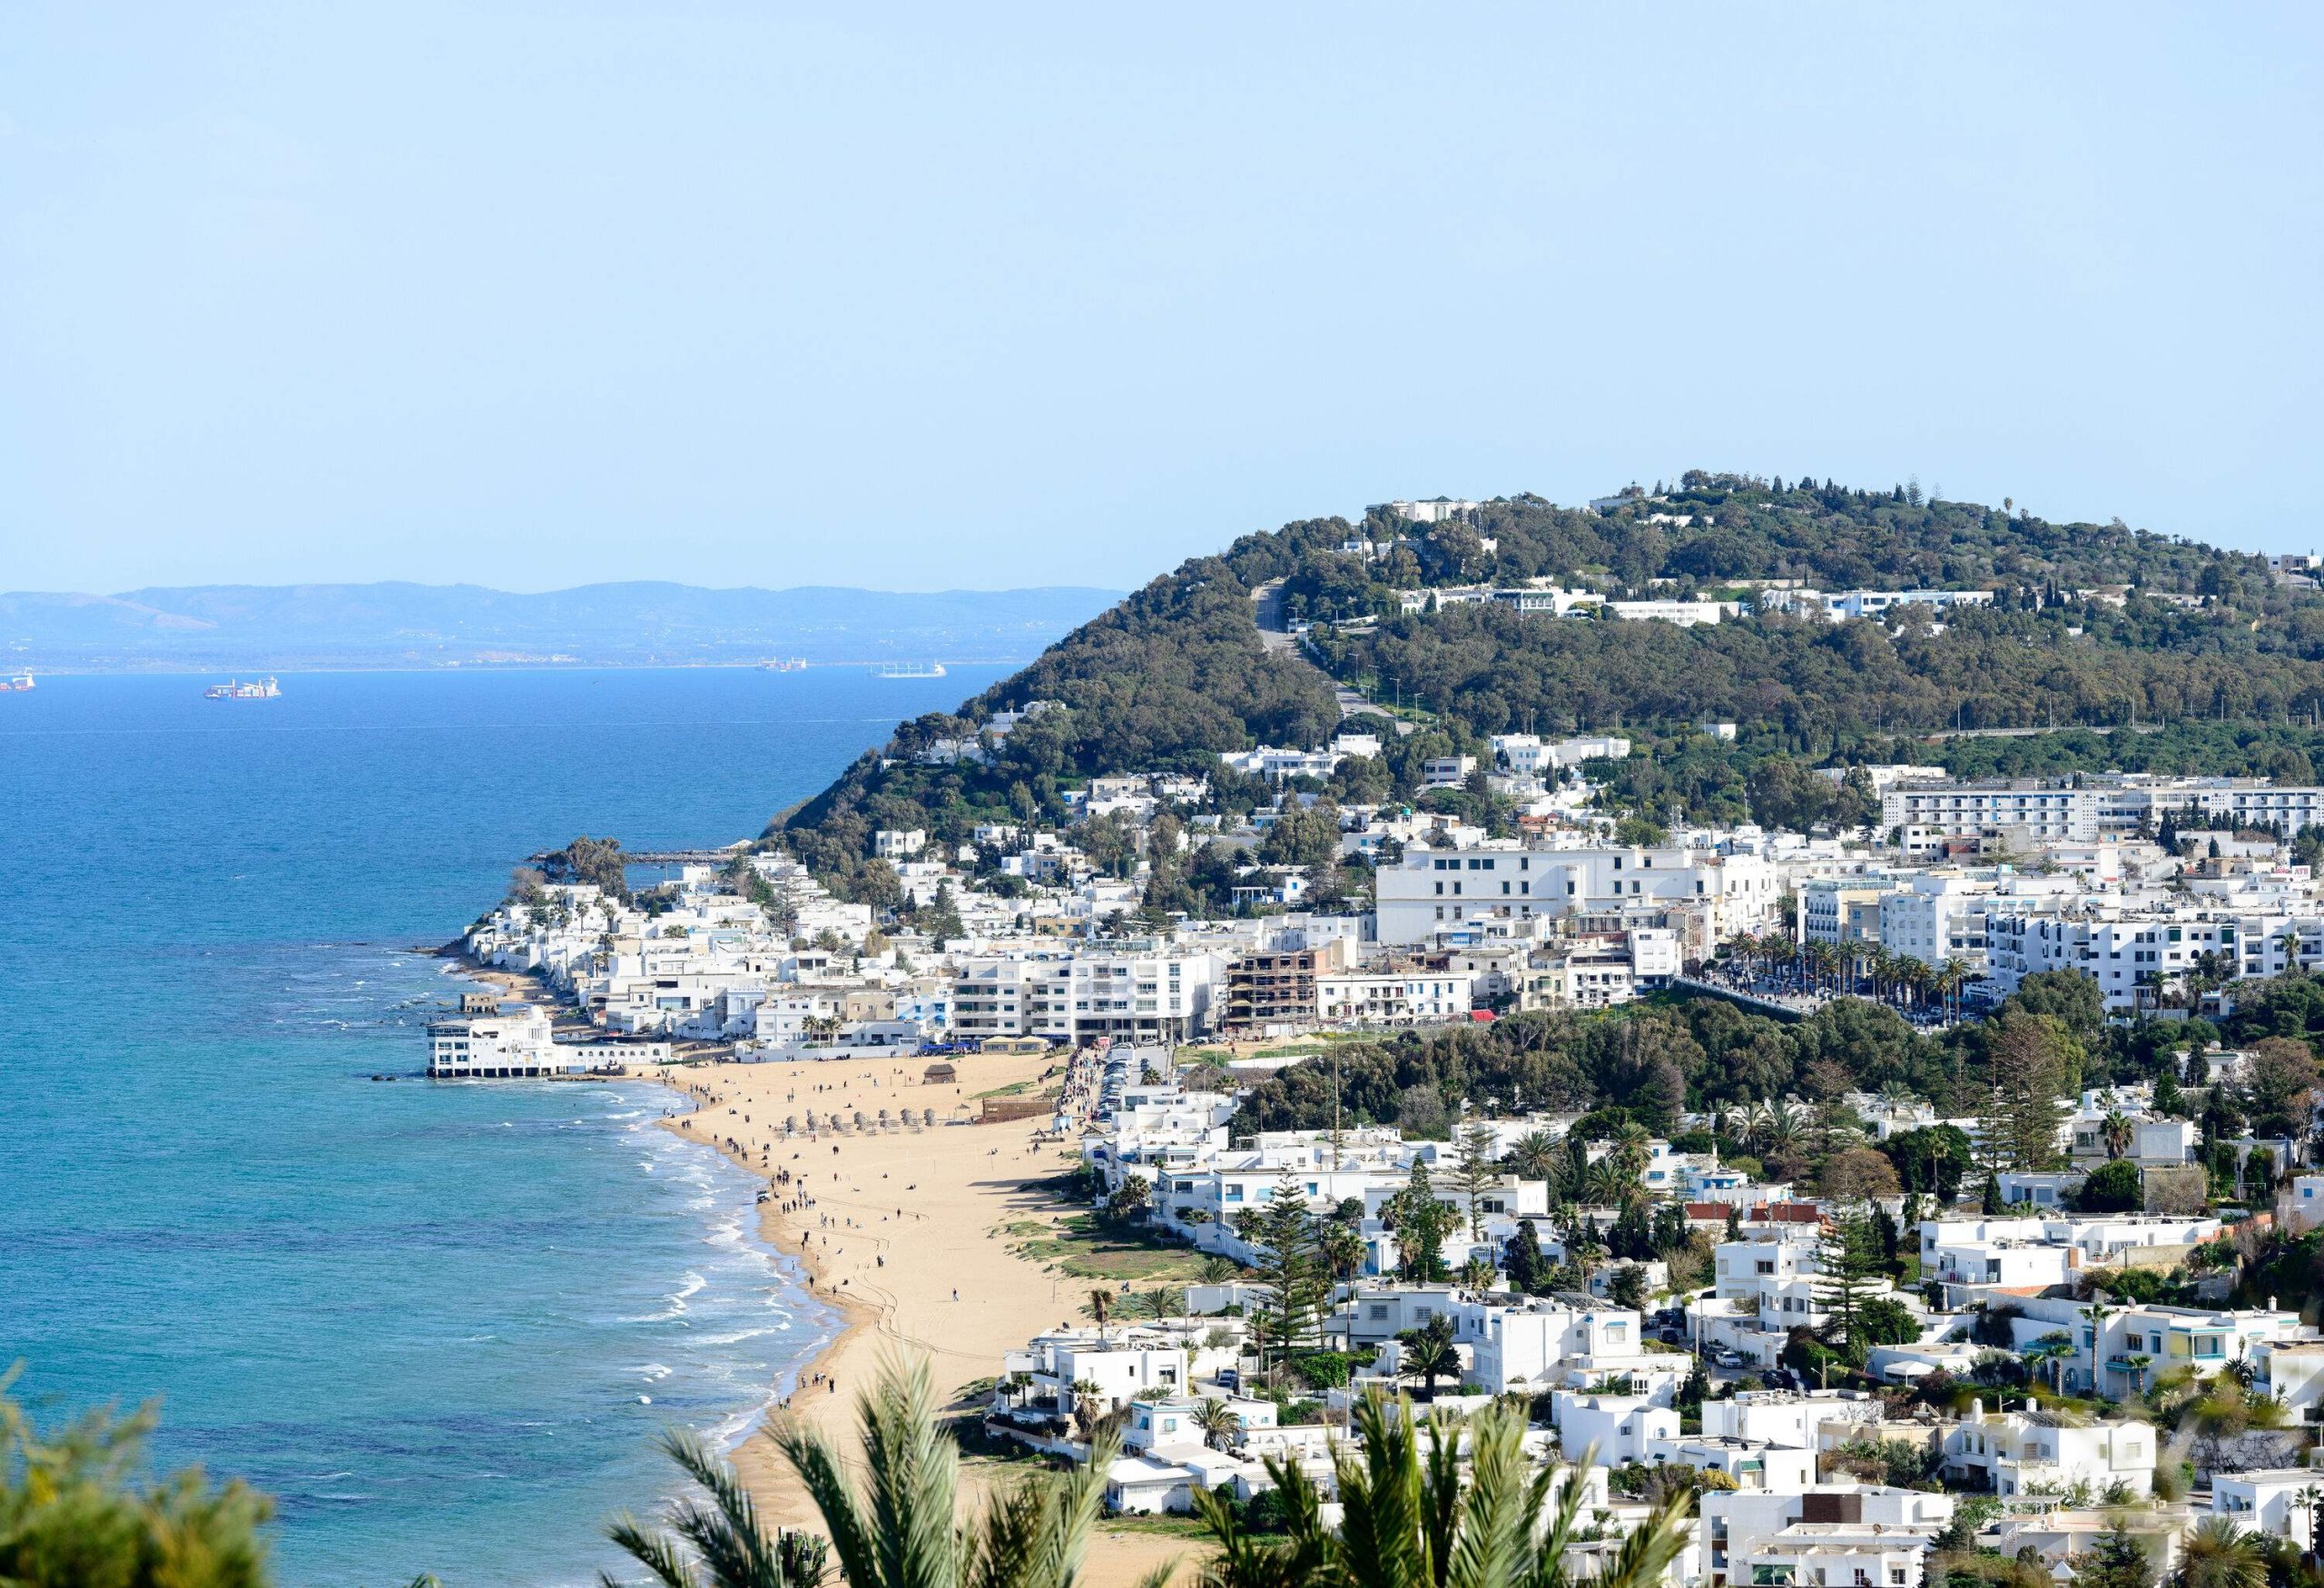 A white sand beach with whitewashed buildings along the coast and hills.